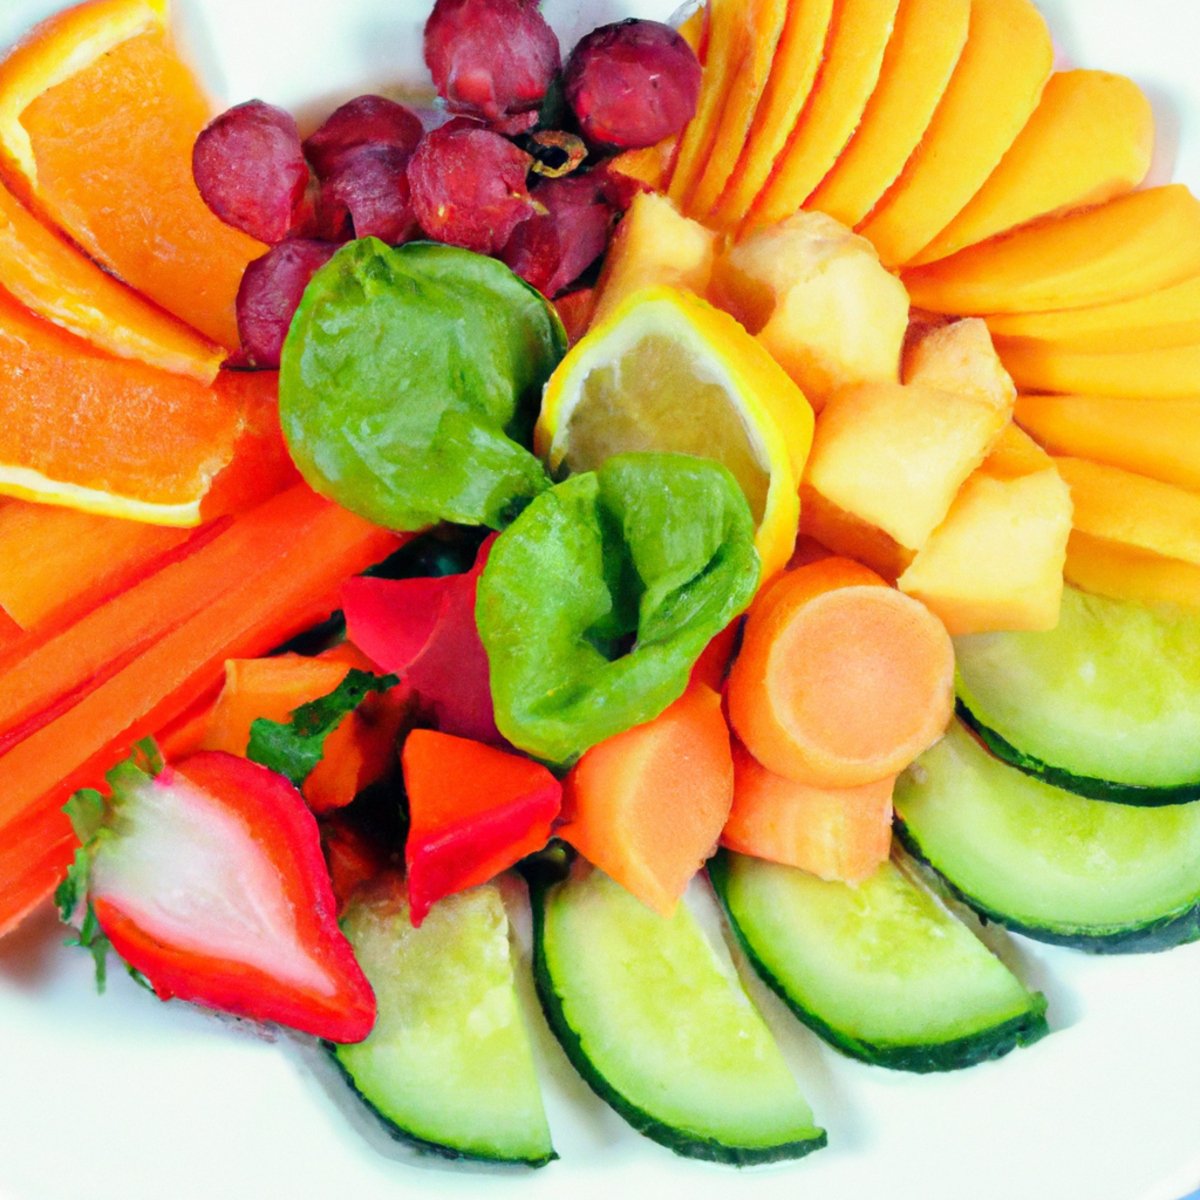 Gastroparesis-friendly plate with fresh fruits, veggies, and lean proteins, promoting nourishment and limited stomach function.